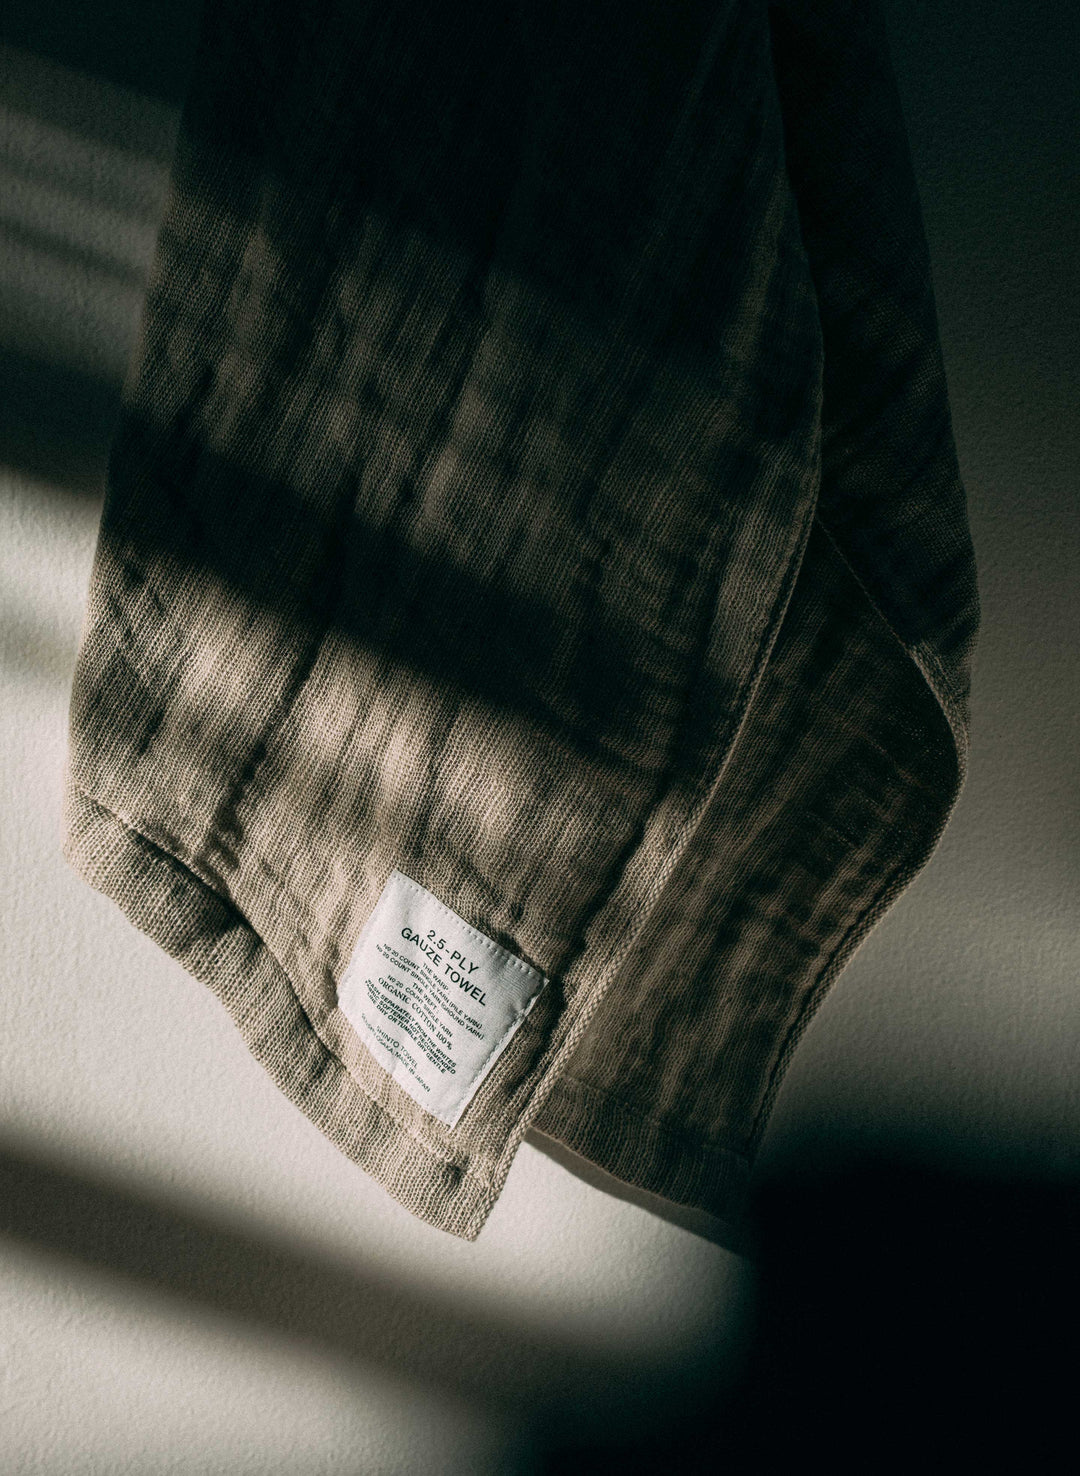 a piece of cloth with a label on it